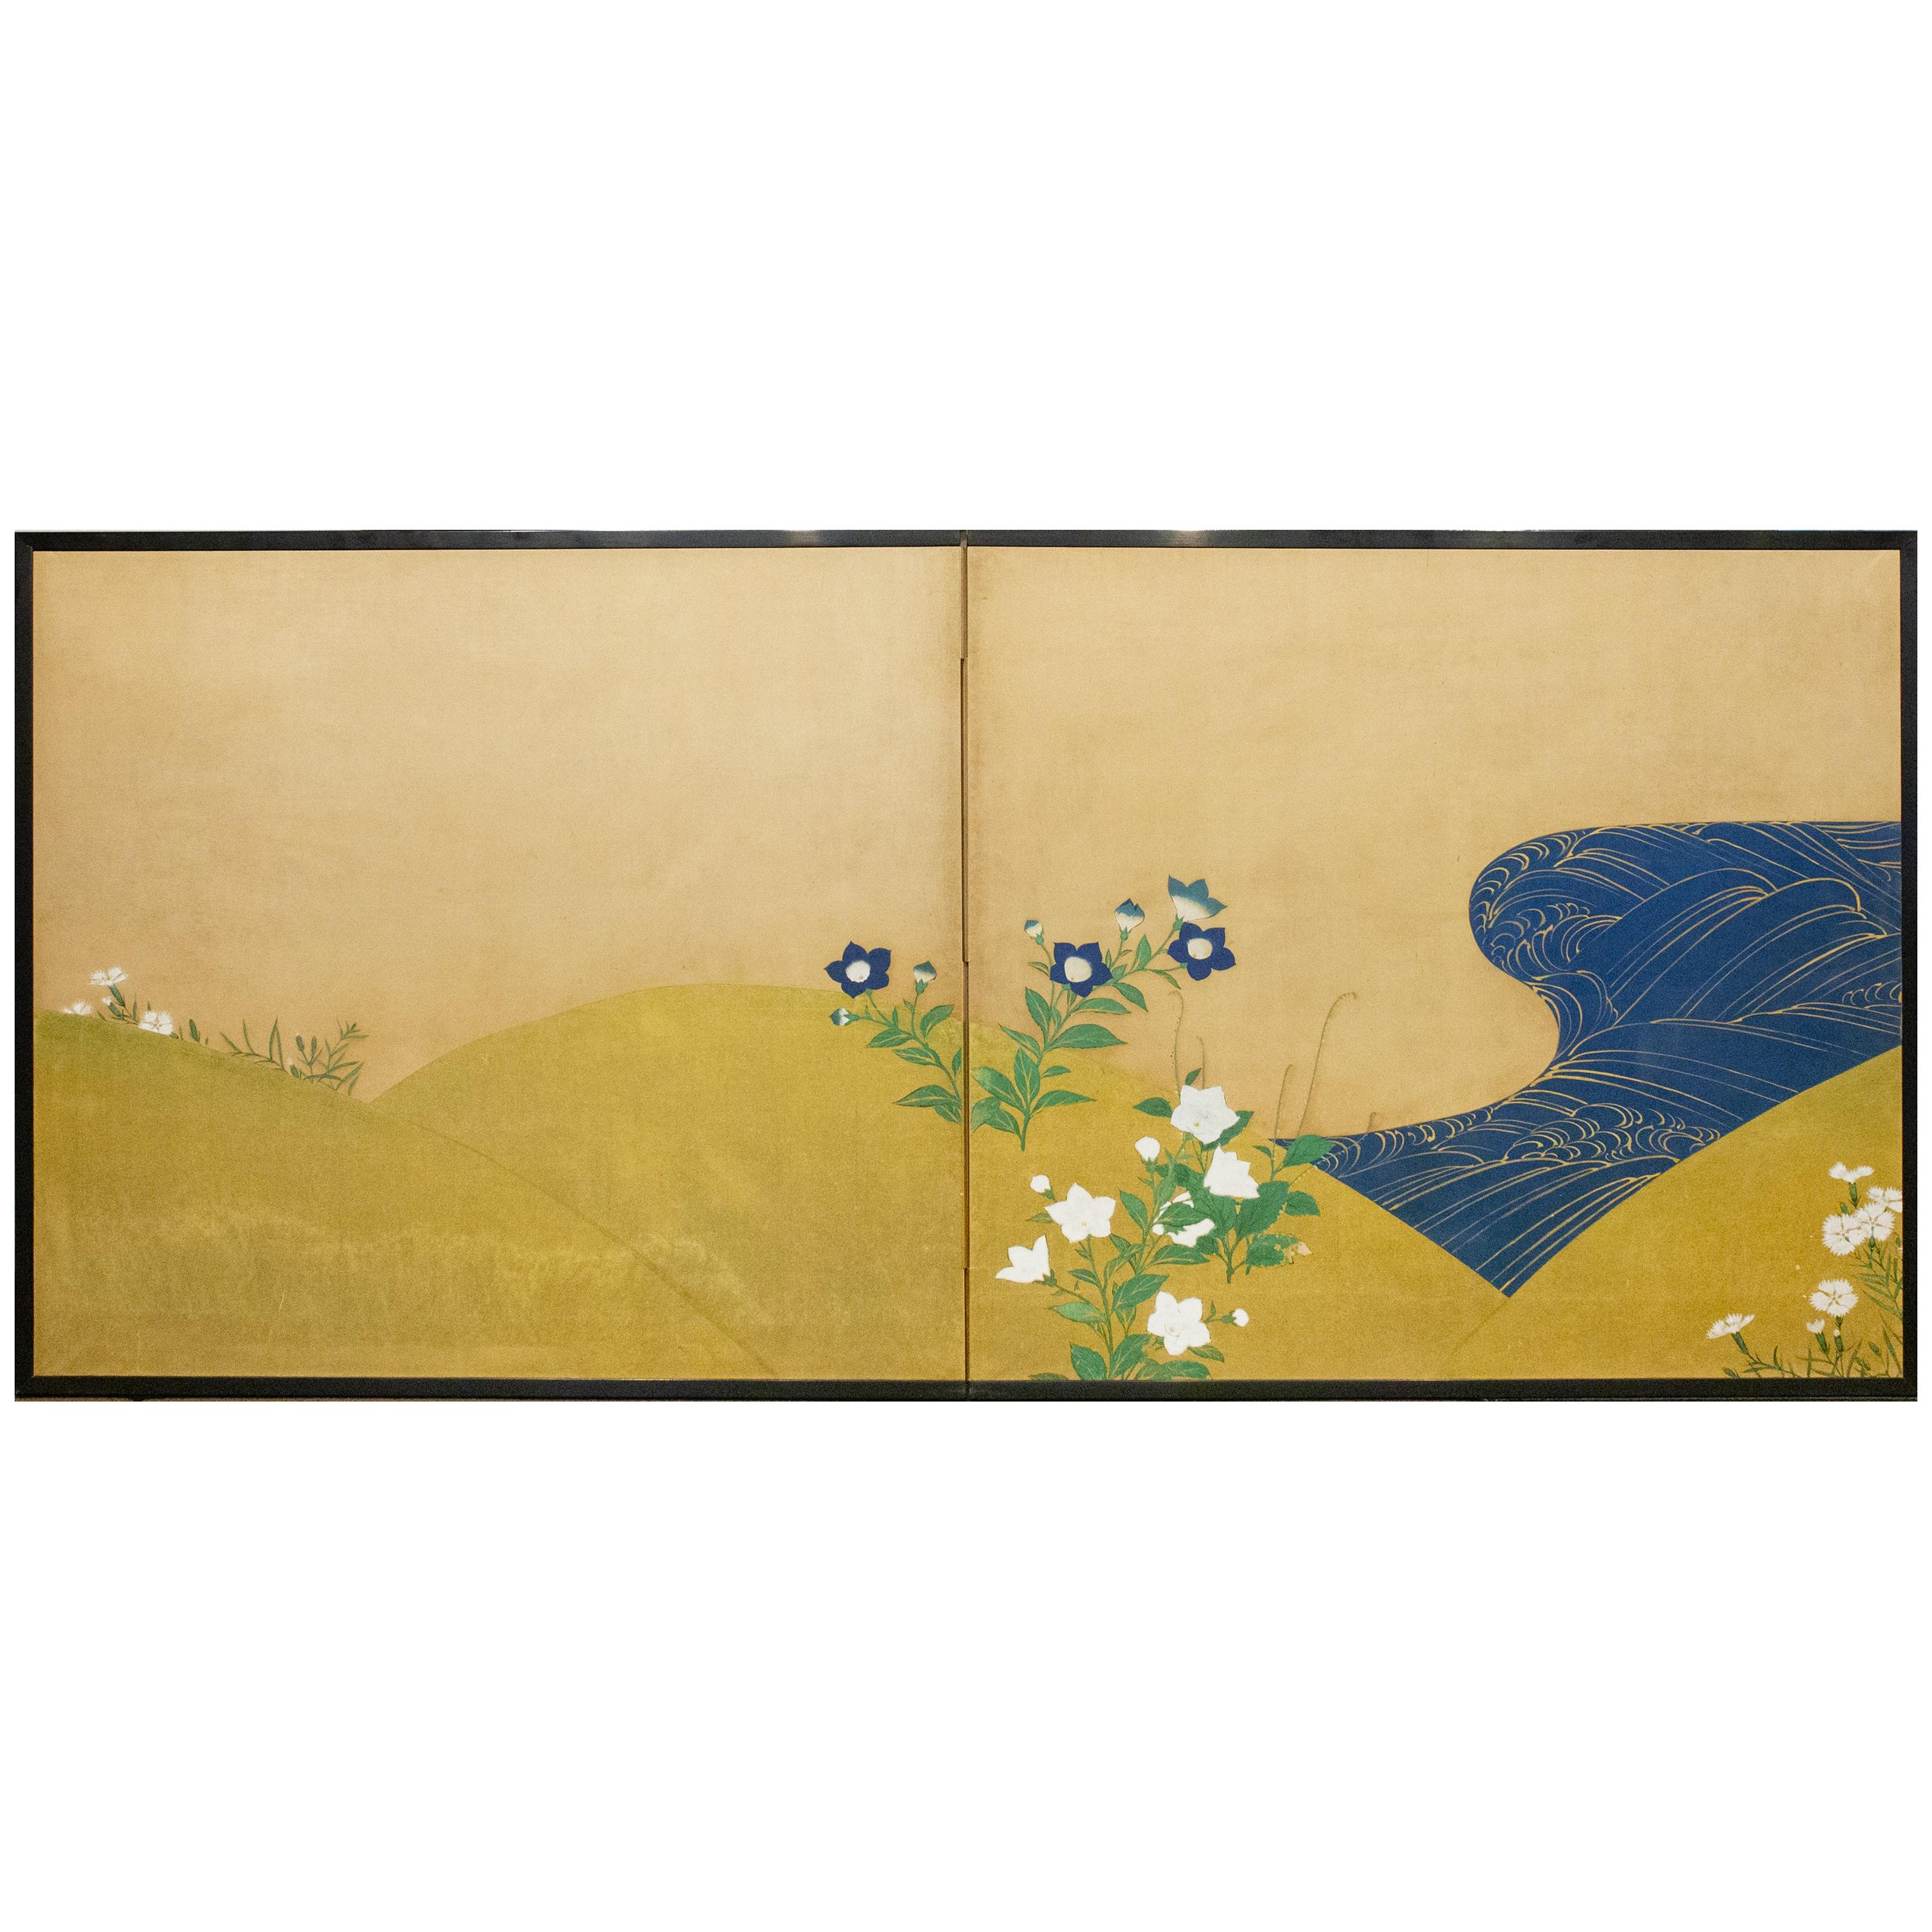 Japanese Two-Panel Screen, Rimpa and Deco Style Painting of Flowers by Stream